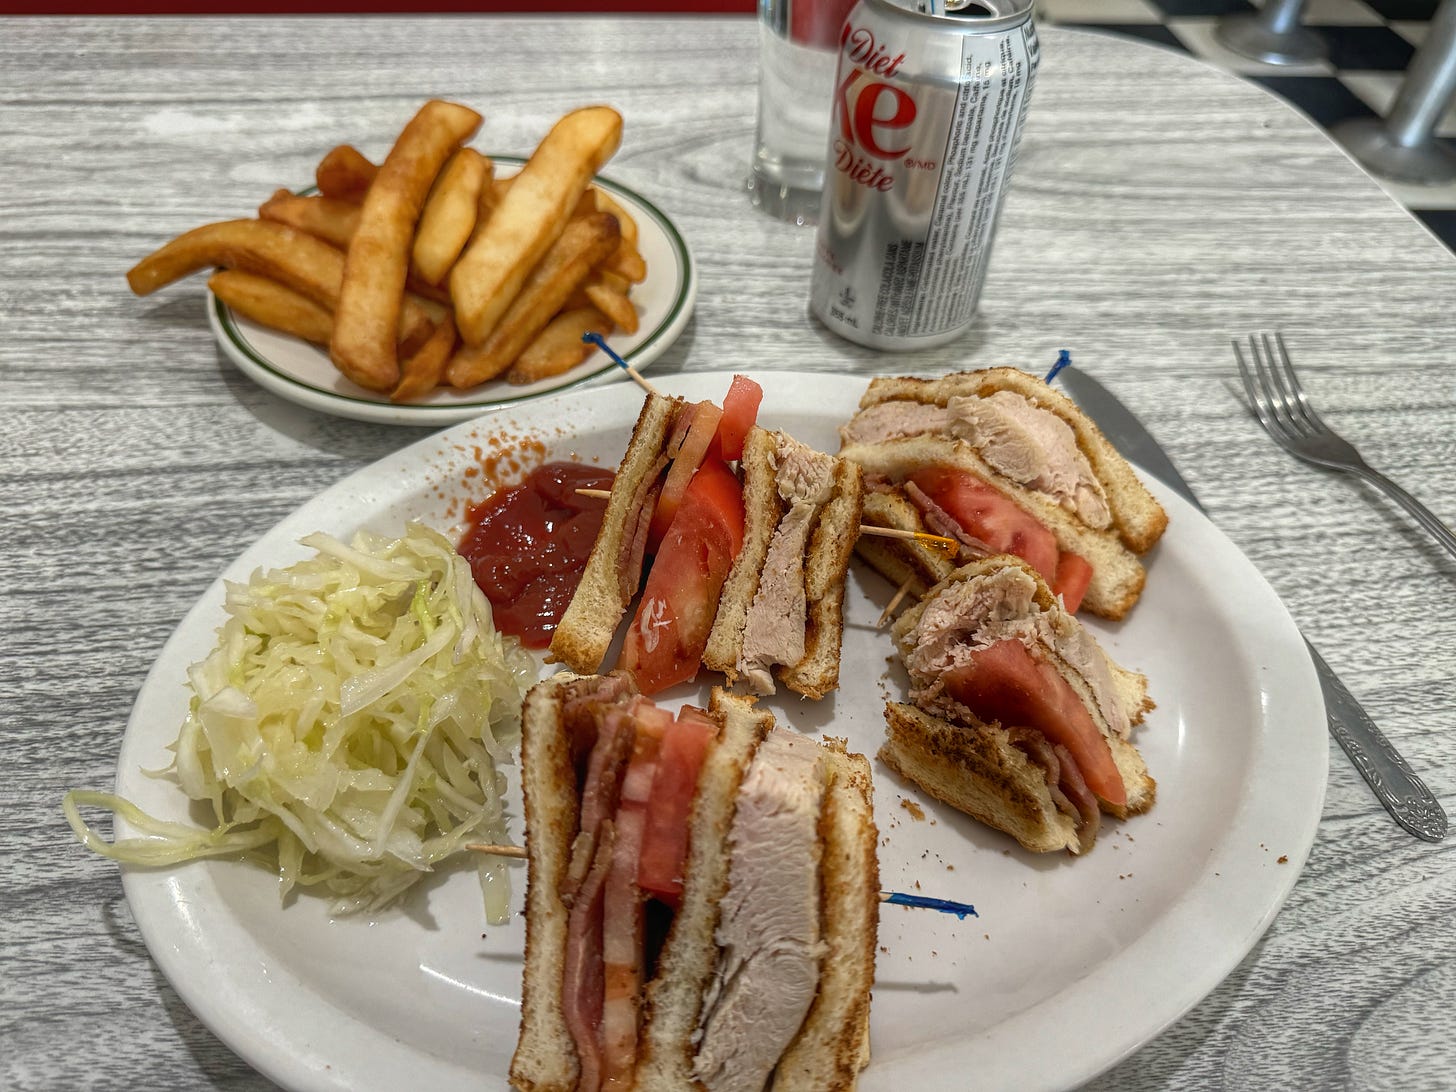 Tabletop photo of a dinner plate with a club sandwich, cole slaw, and ketchup on it. In the background there is a dish of french fries and a can of Diet Coke. The ketchup on the plate is spattered in a way that suggests the ketchup bottle was running out.